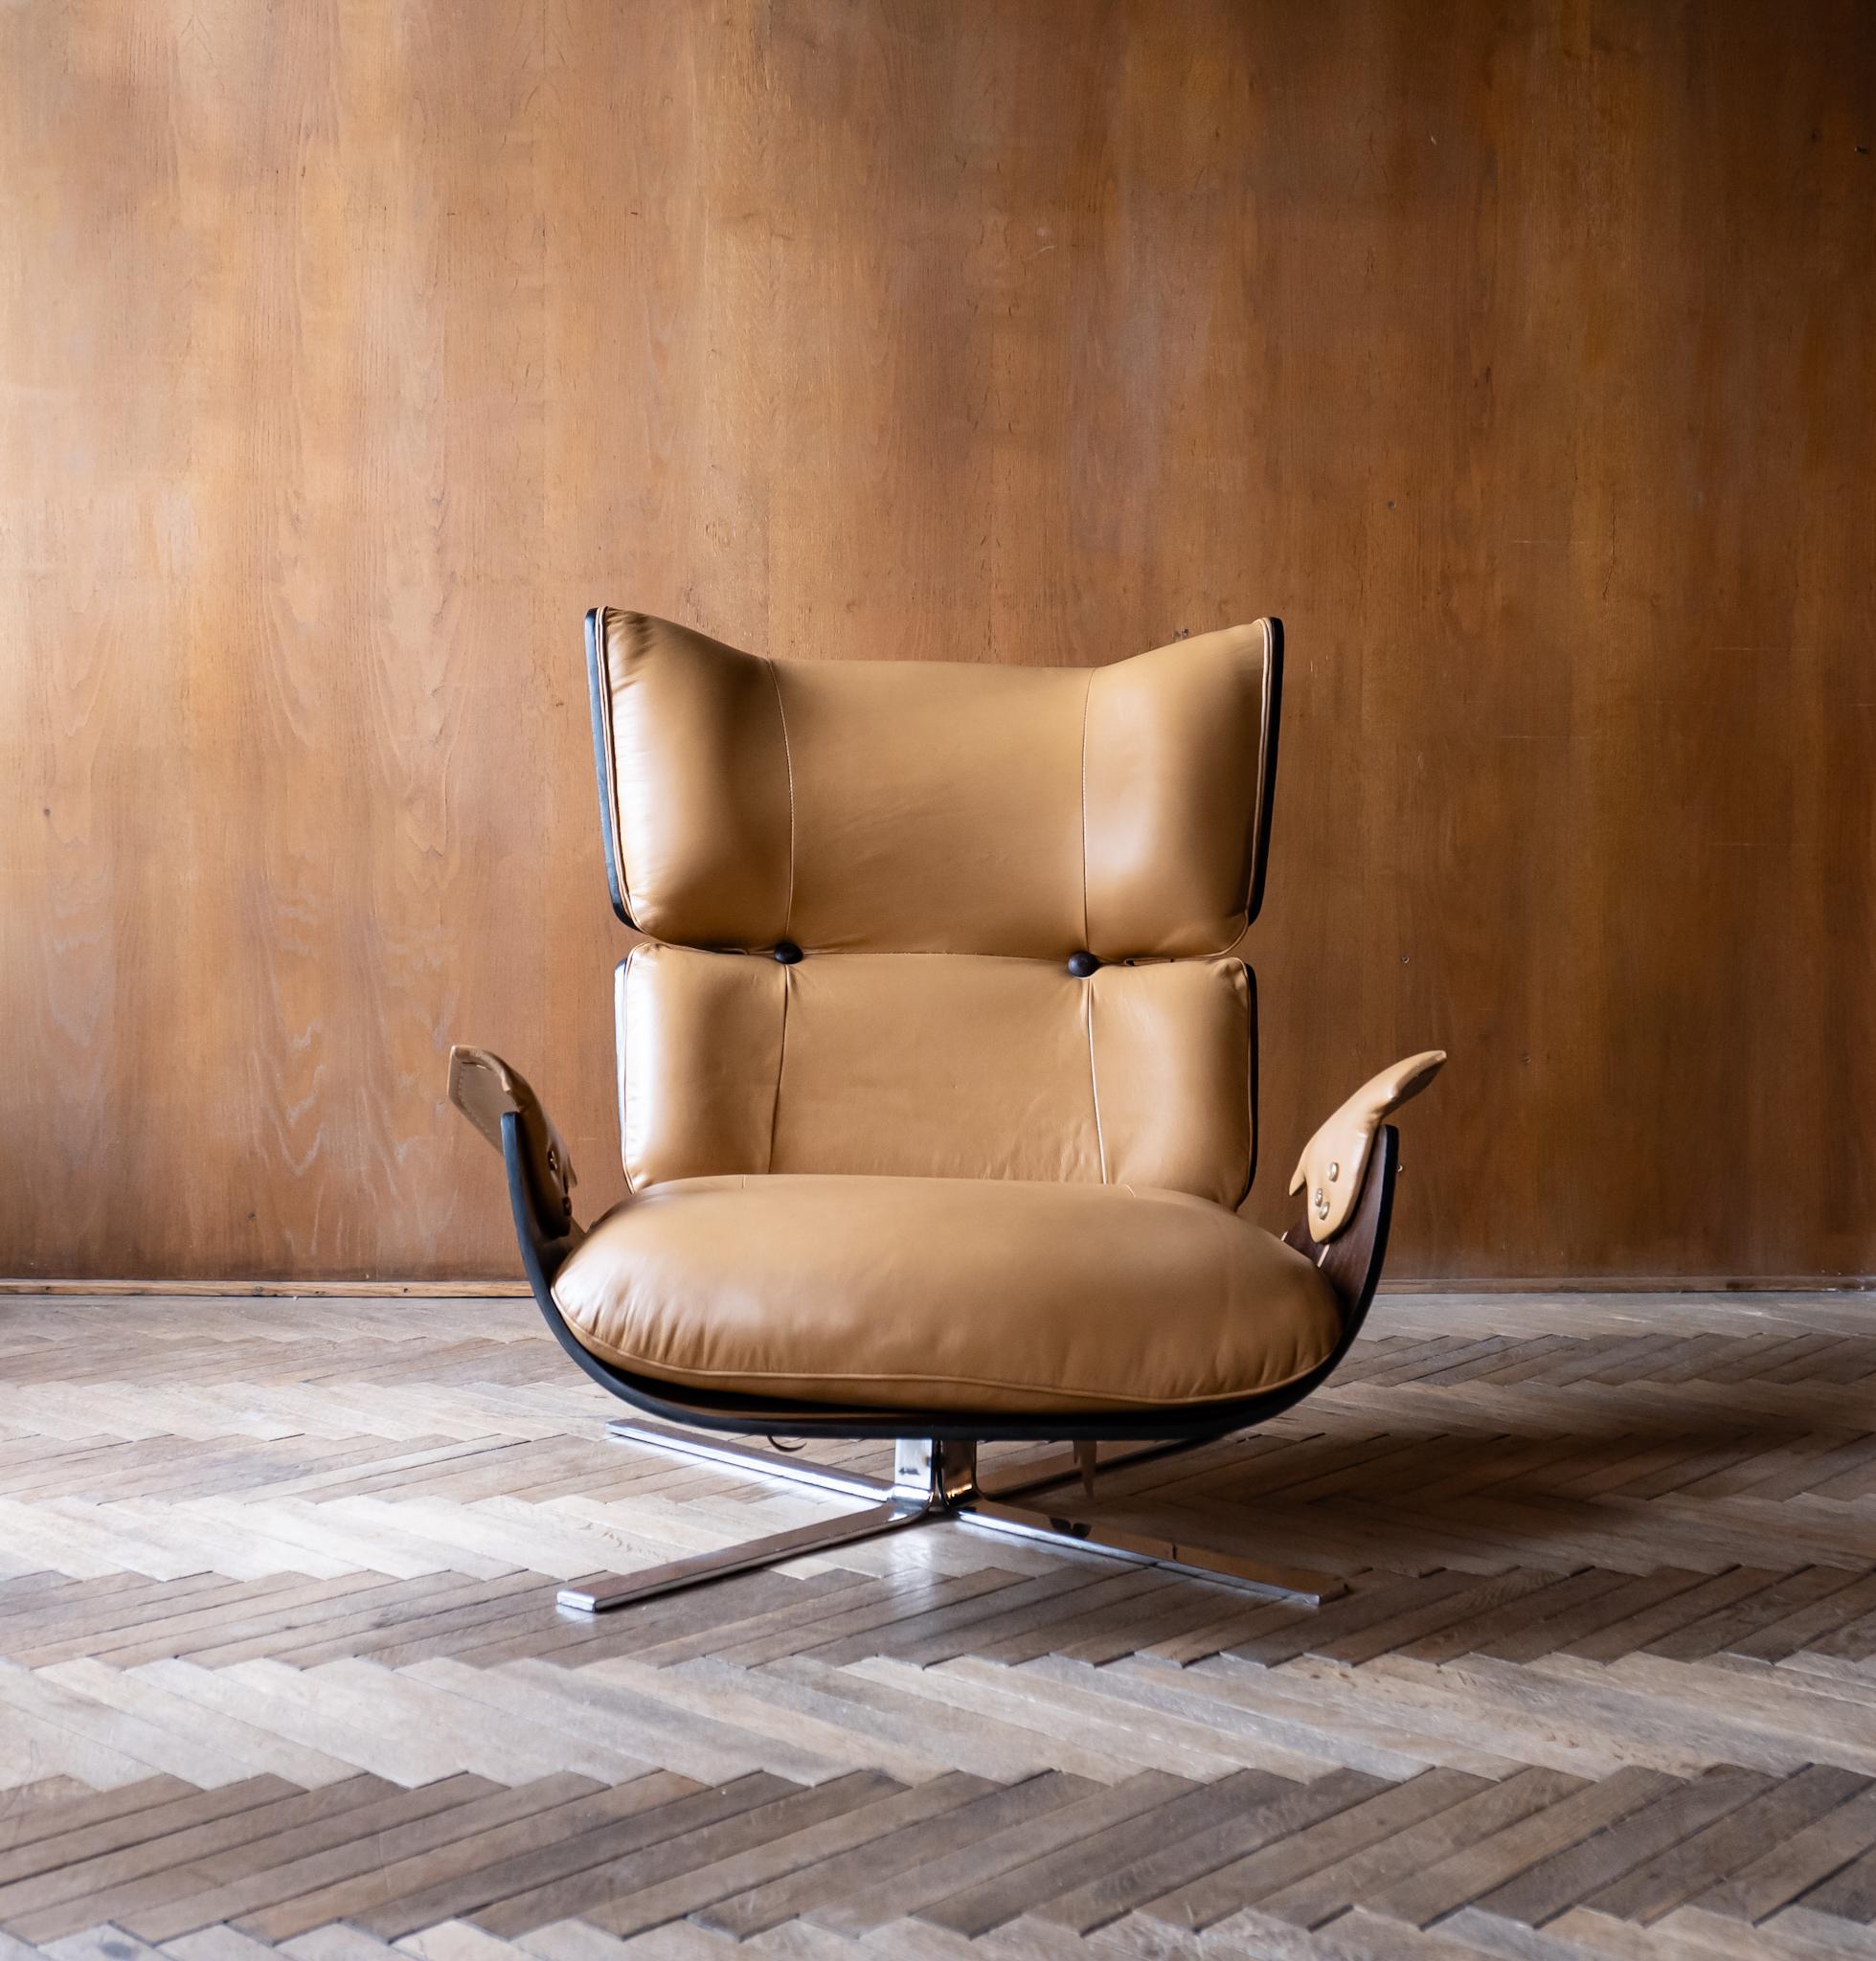 Mid-20th Century Mid-Century Modern Lounge Chair with Ottoman by Jorge Zalszupin, Brazil 1960s